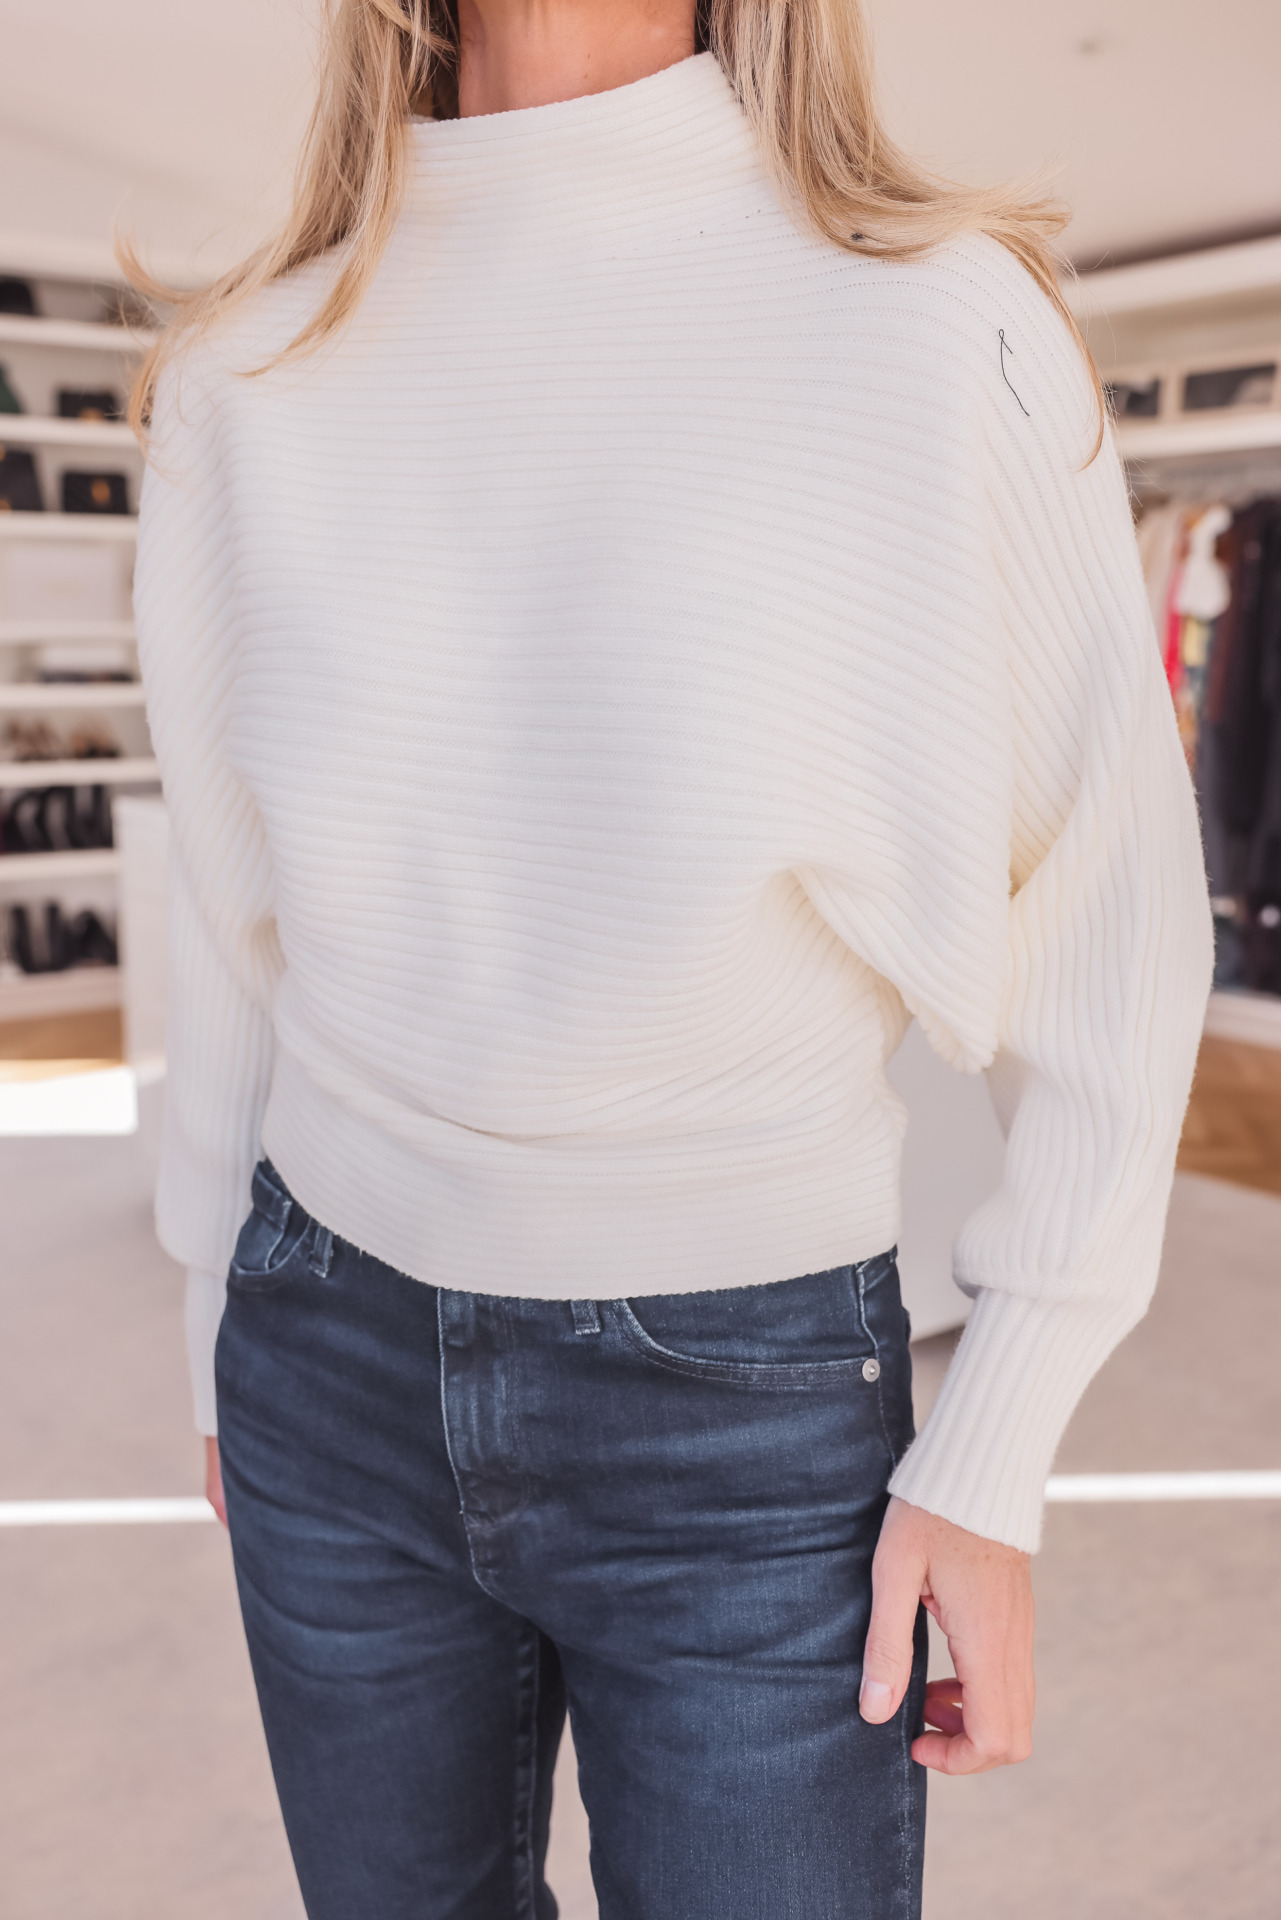 cream sweater and jeans